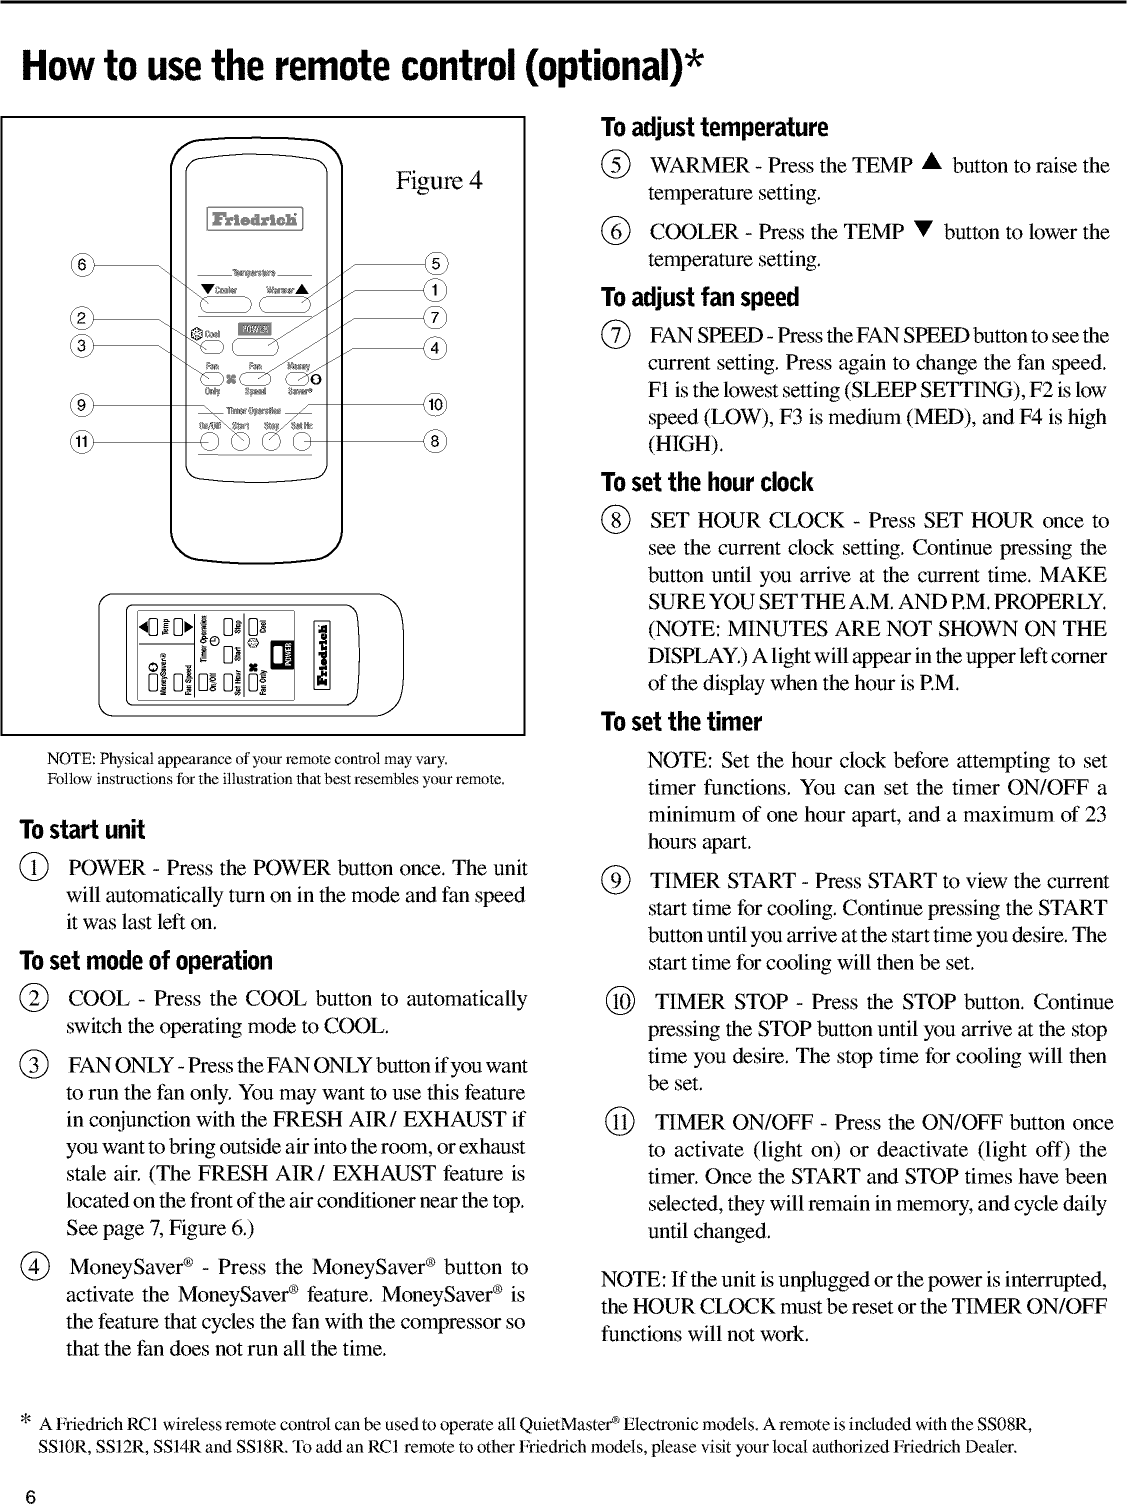 Page 6 of 10 - FRIEDRICH  Air Conditioner Room (42) Manual L0404286